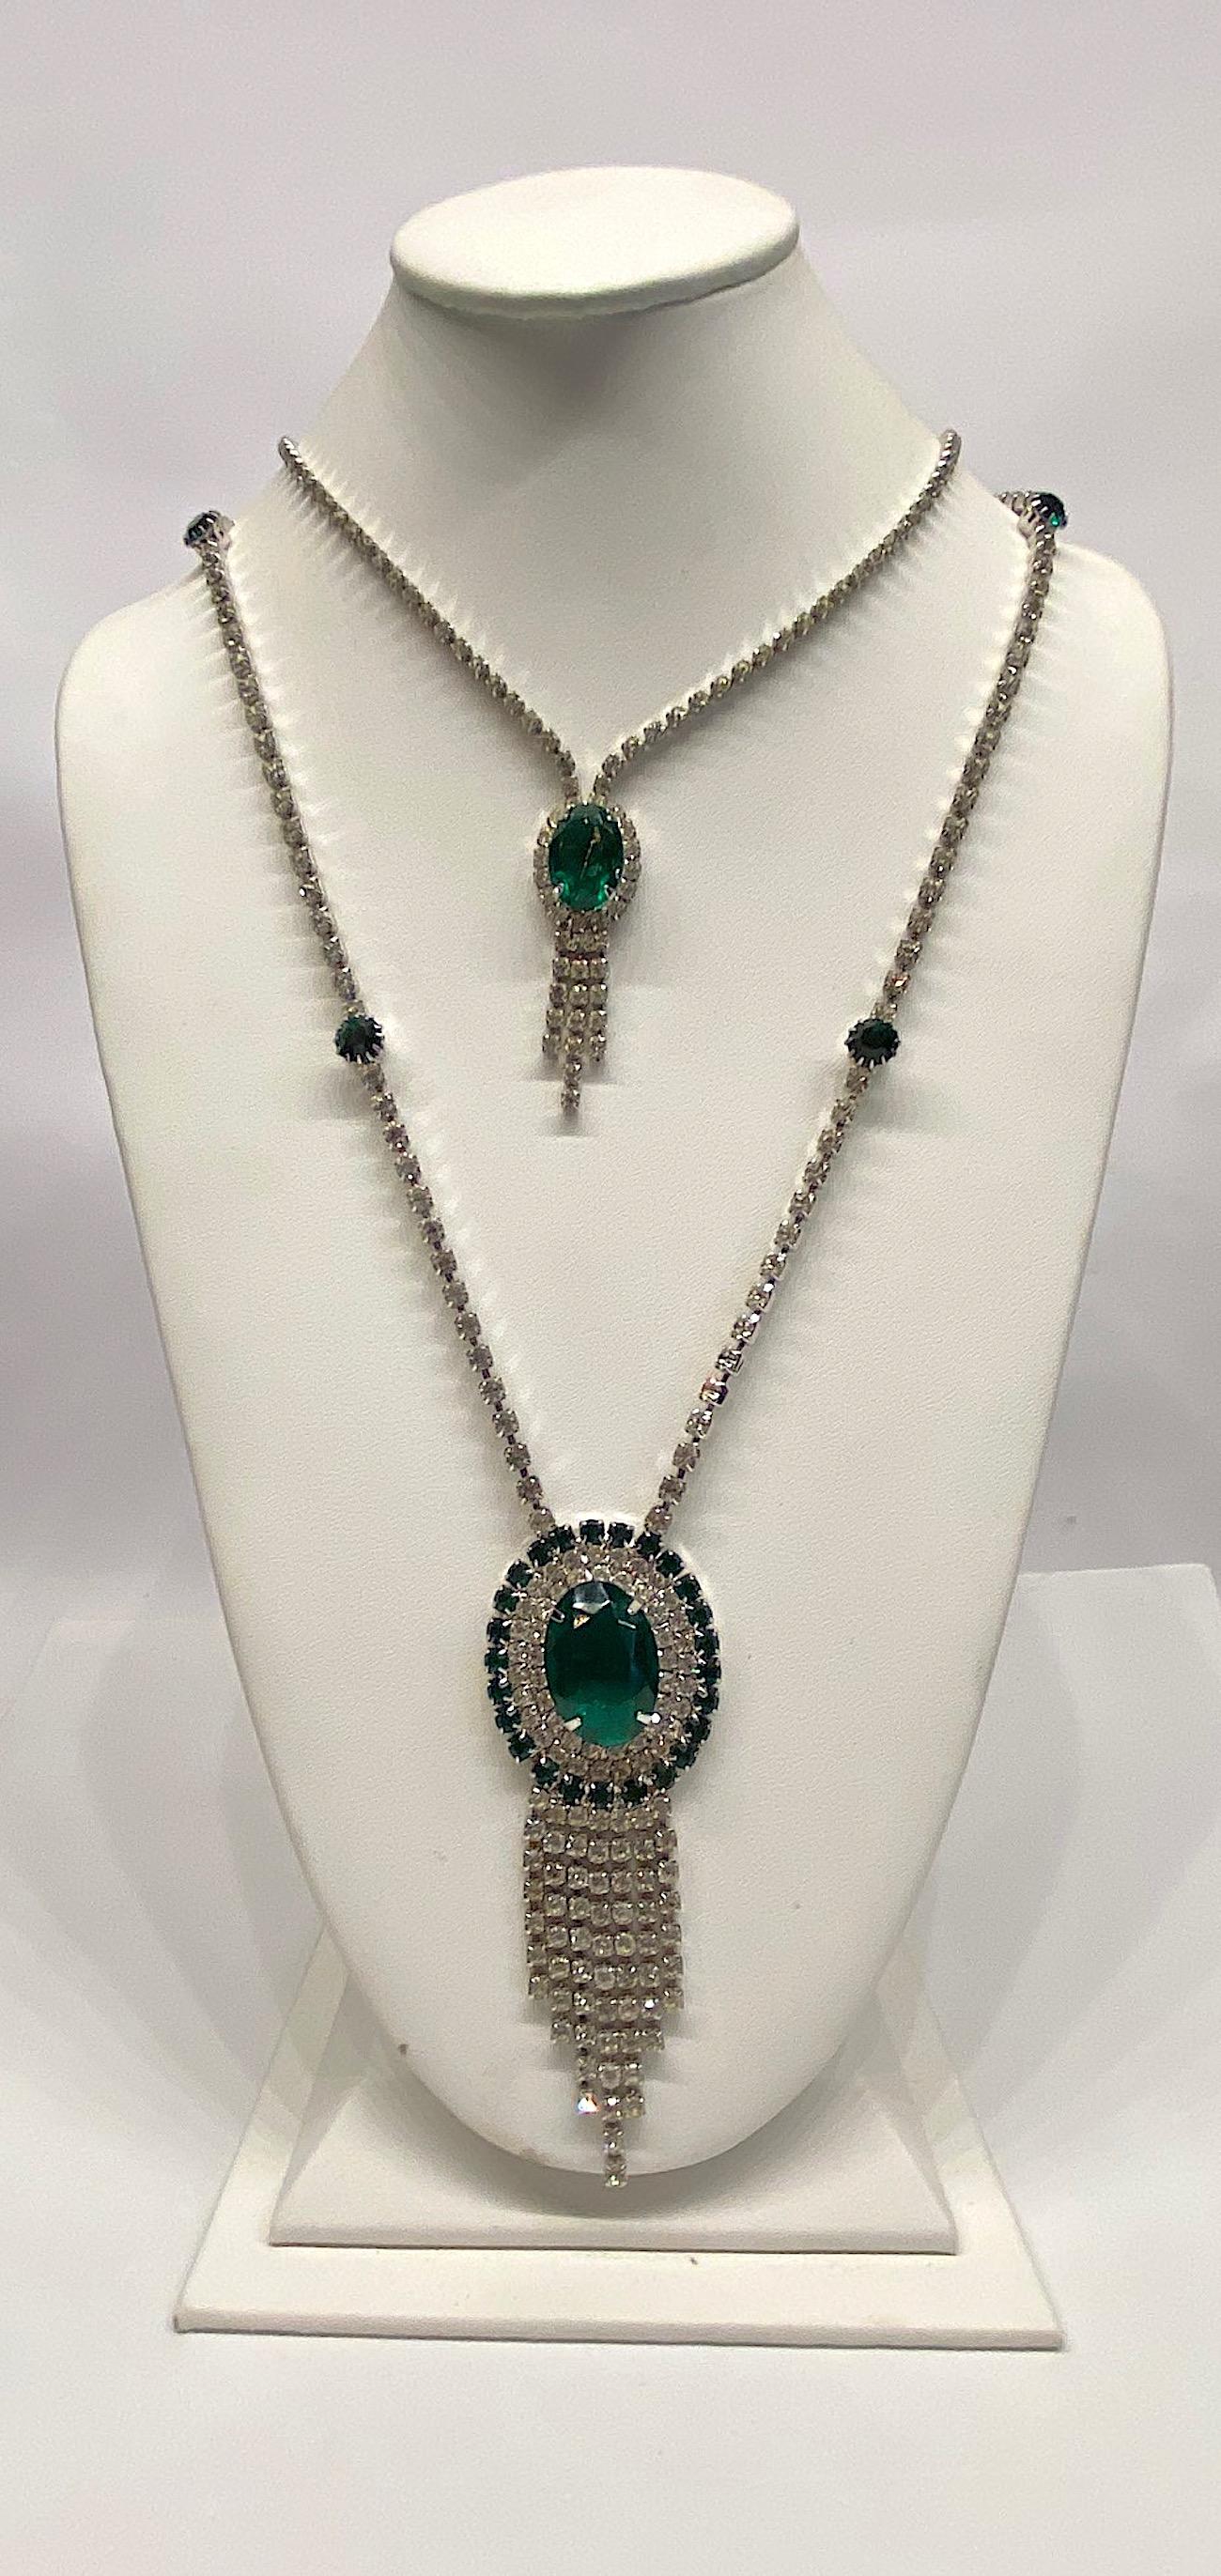 1950s / 1960s Emerald Green Crystal & Rhinestone Double Pendant Necklace 1